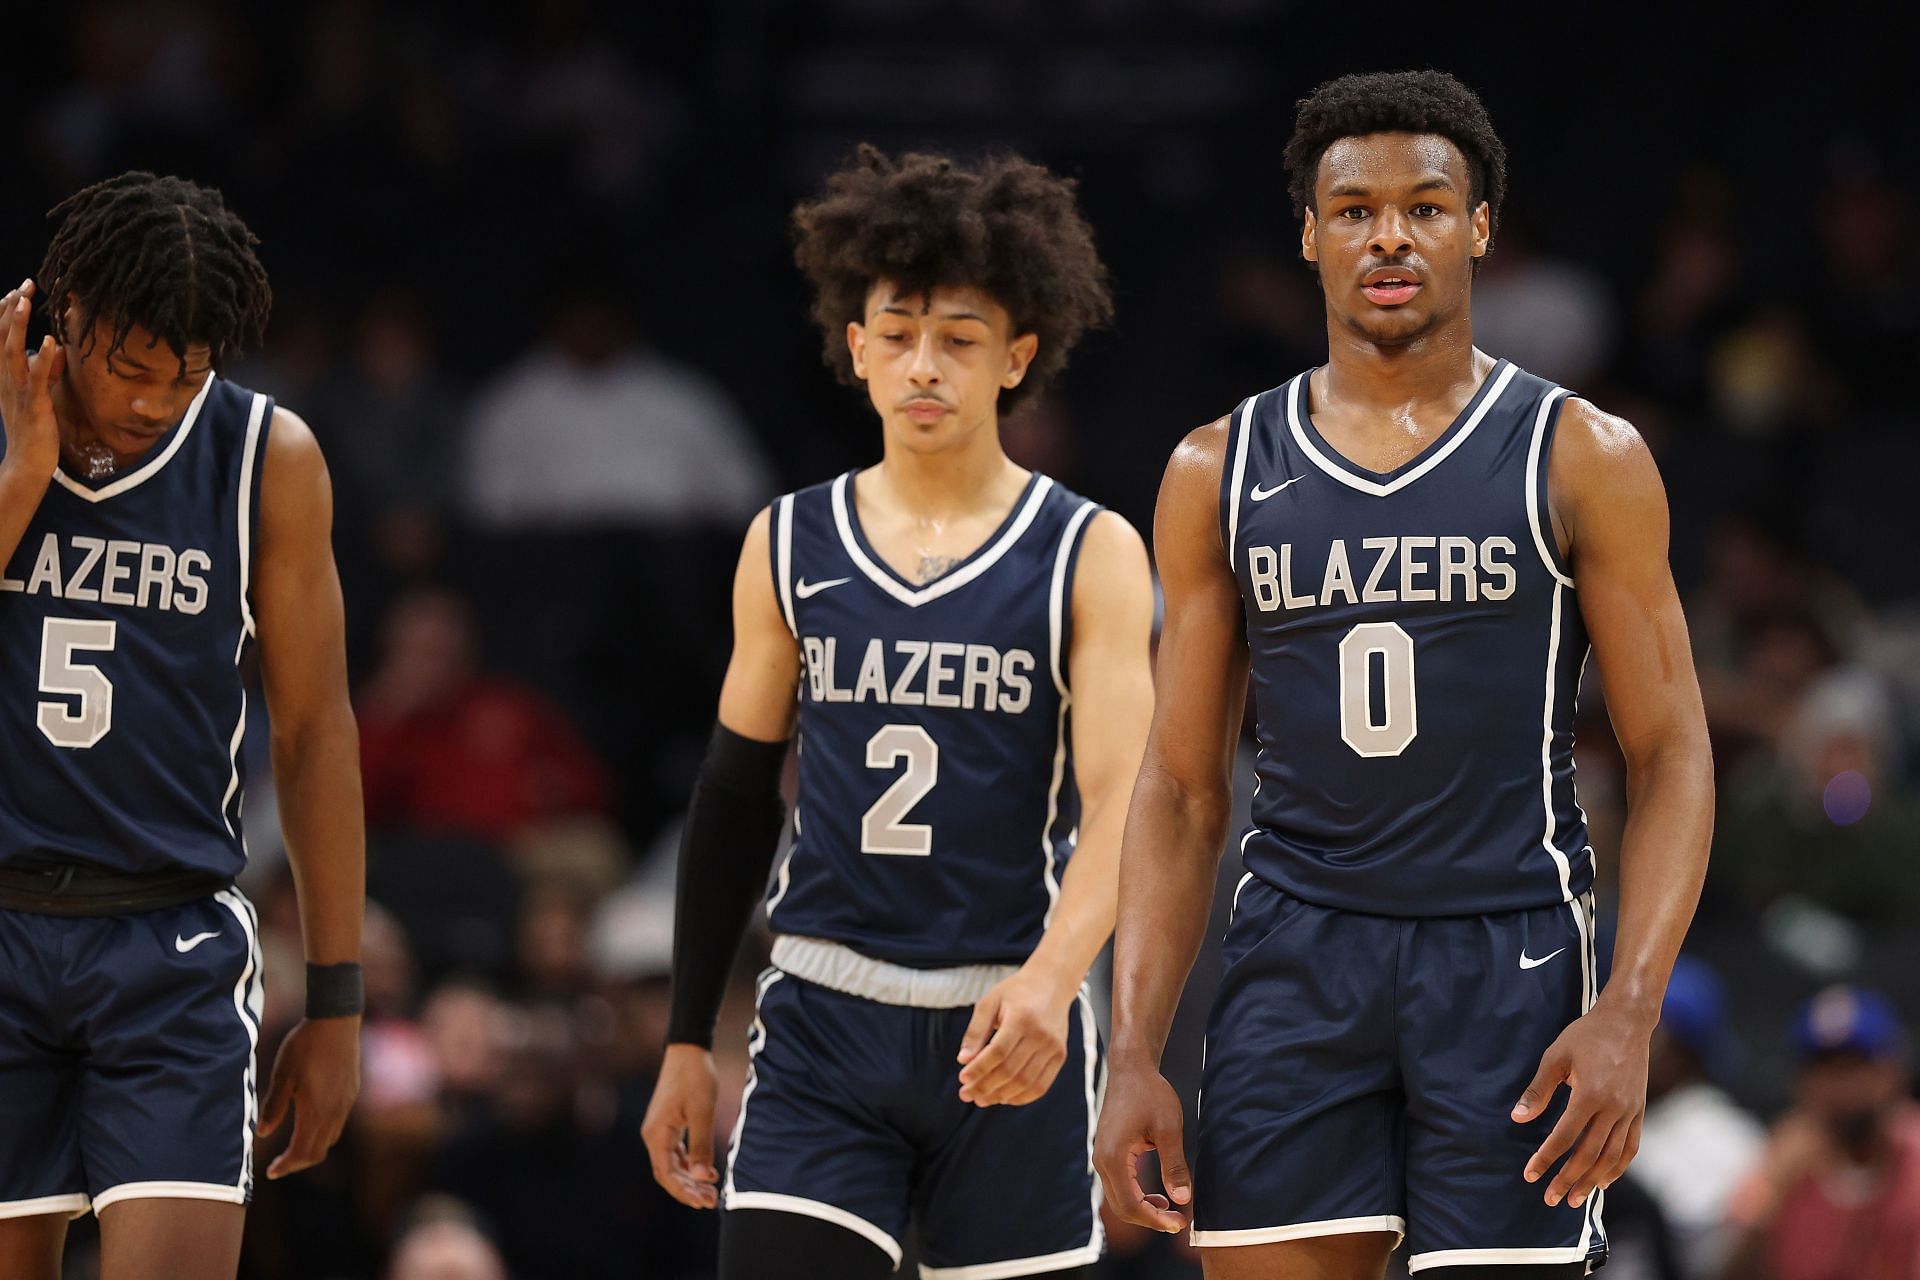 Bronny James and Zaire Wade played together at one point (Image via Getty Images)